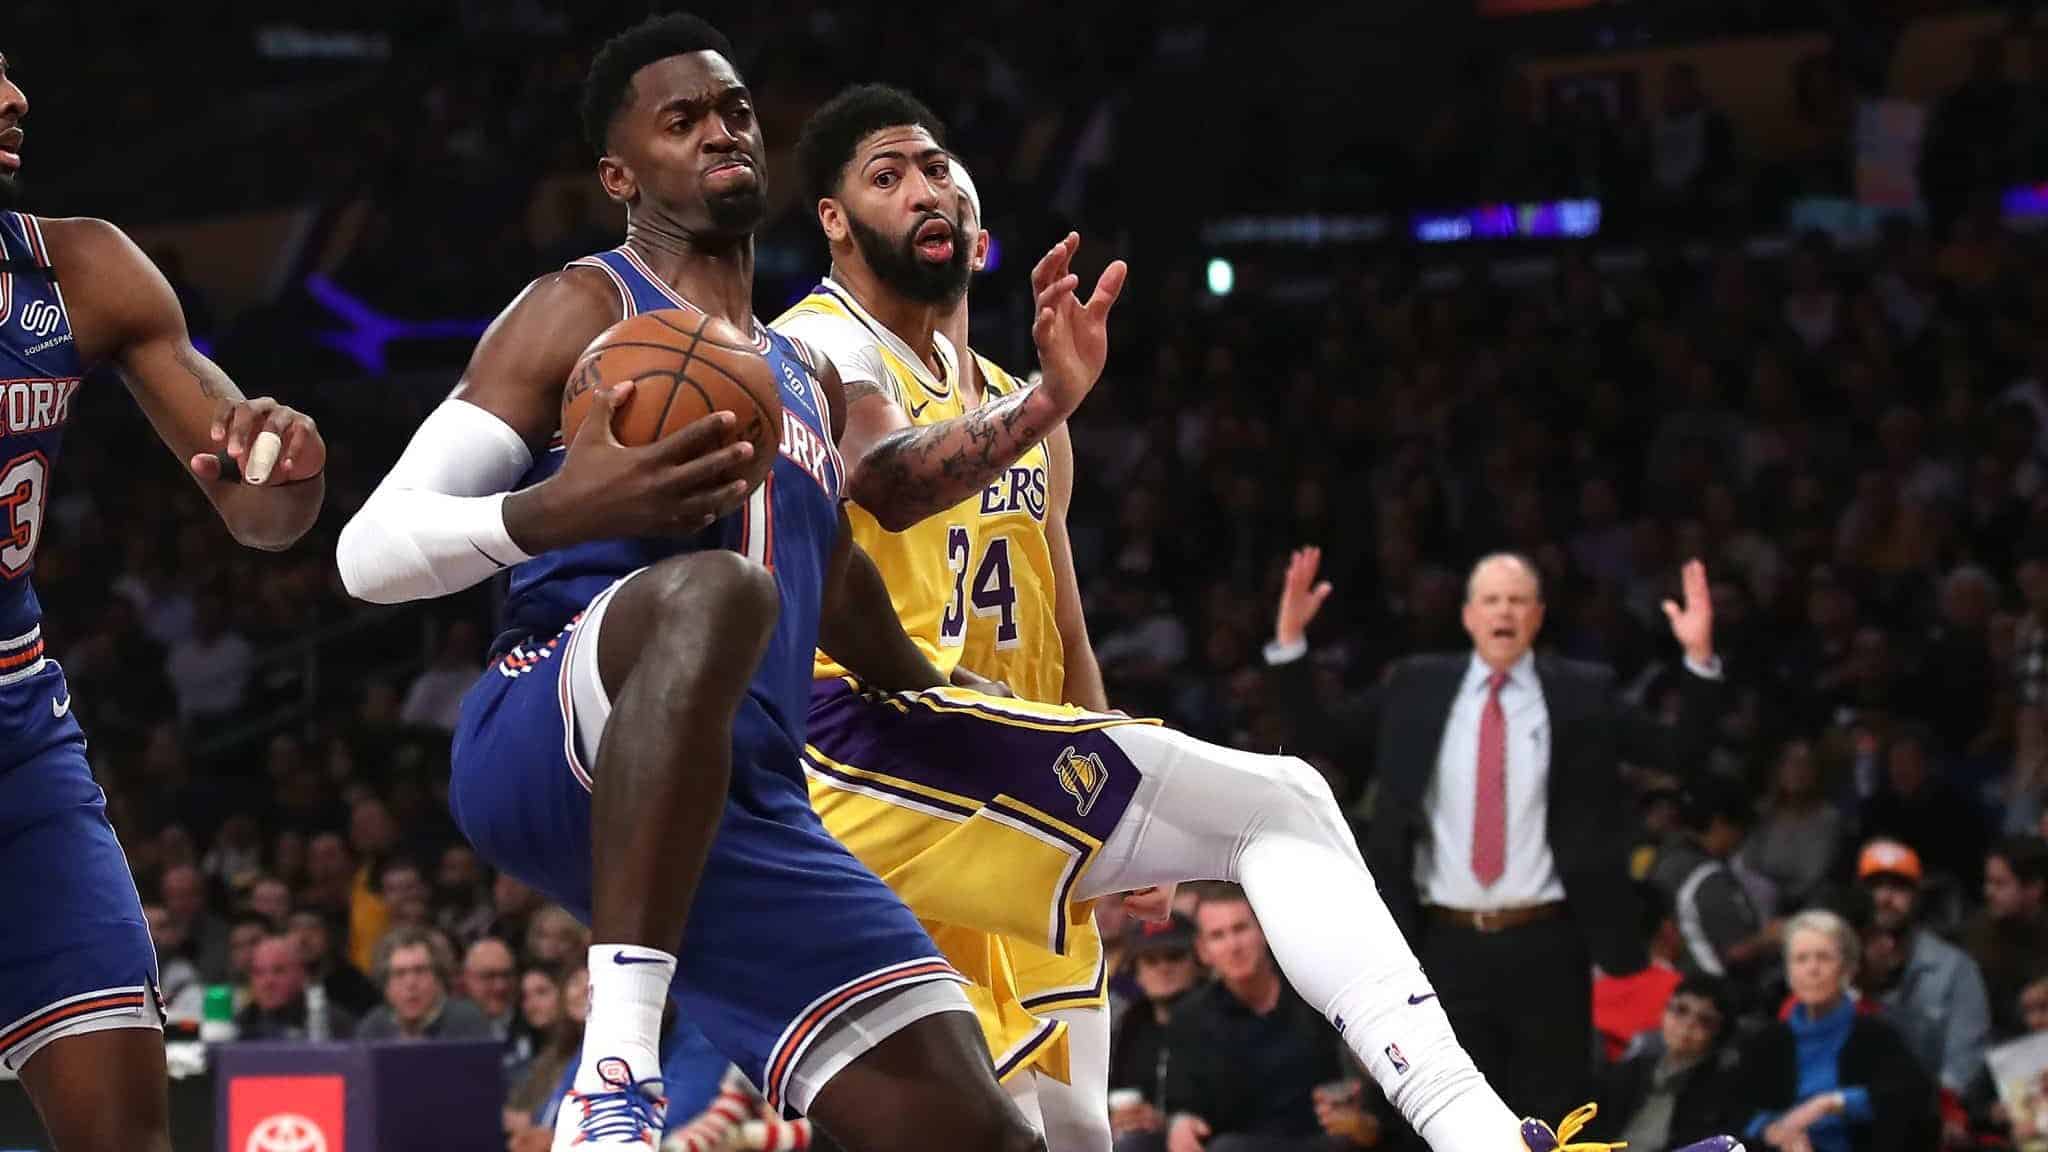 LOS ANGELES, CALIFORNIA - JANUARY 07: Bobby Portis #1 of the New York Knicks rebounds past Anthony Davis #3 of the Los Angeles Lakers during the first half of a game at Staples Center on January 07, 2020 in Los Angeles, California.